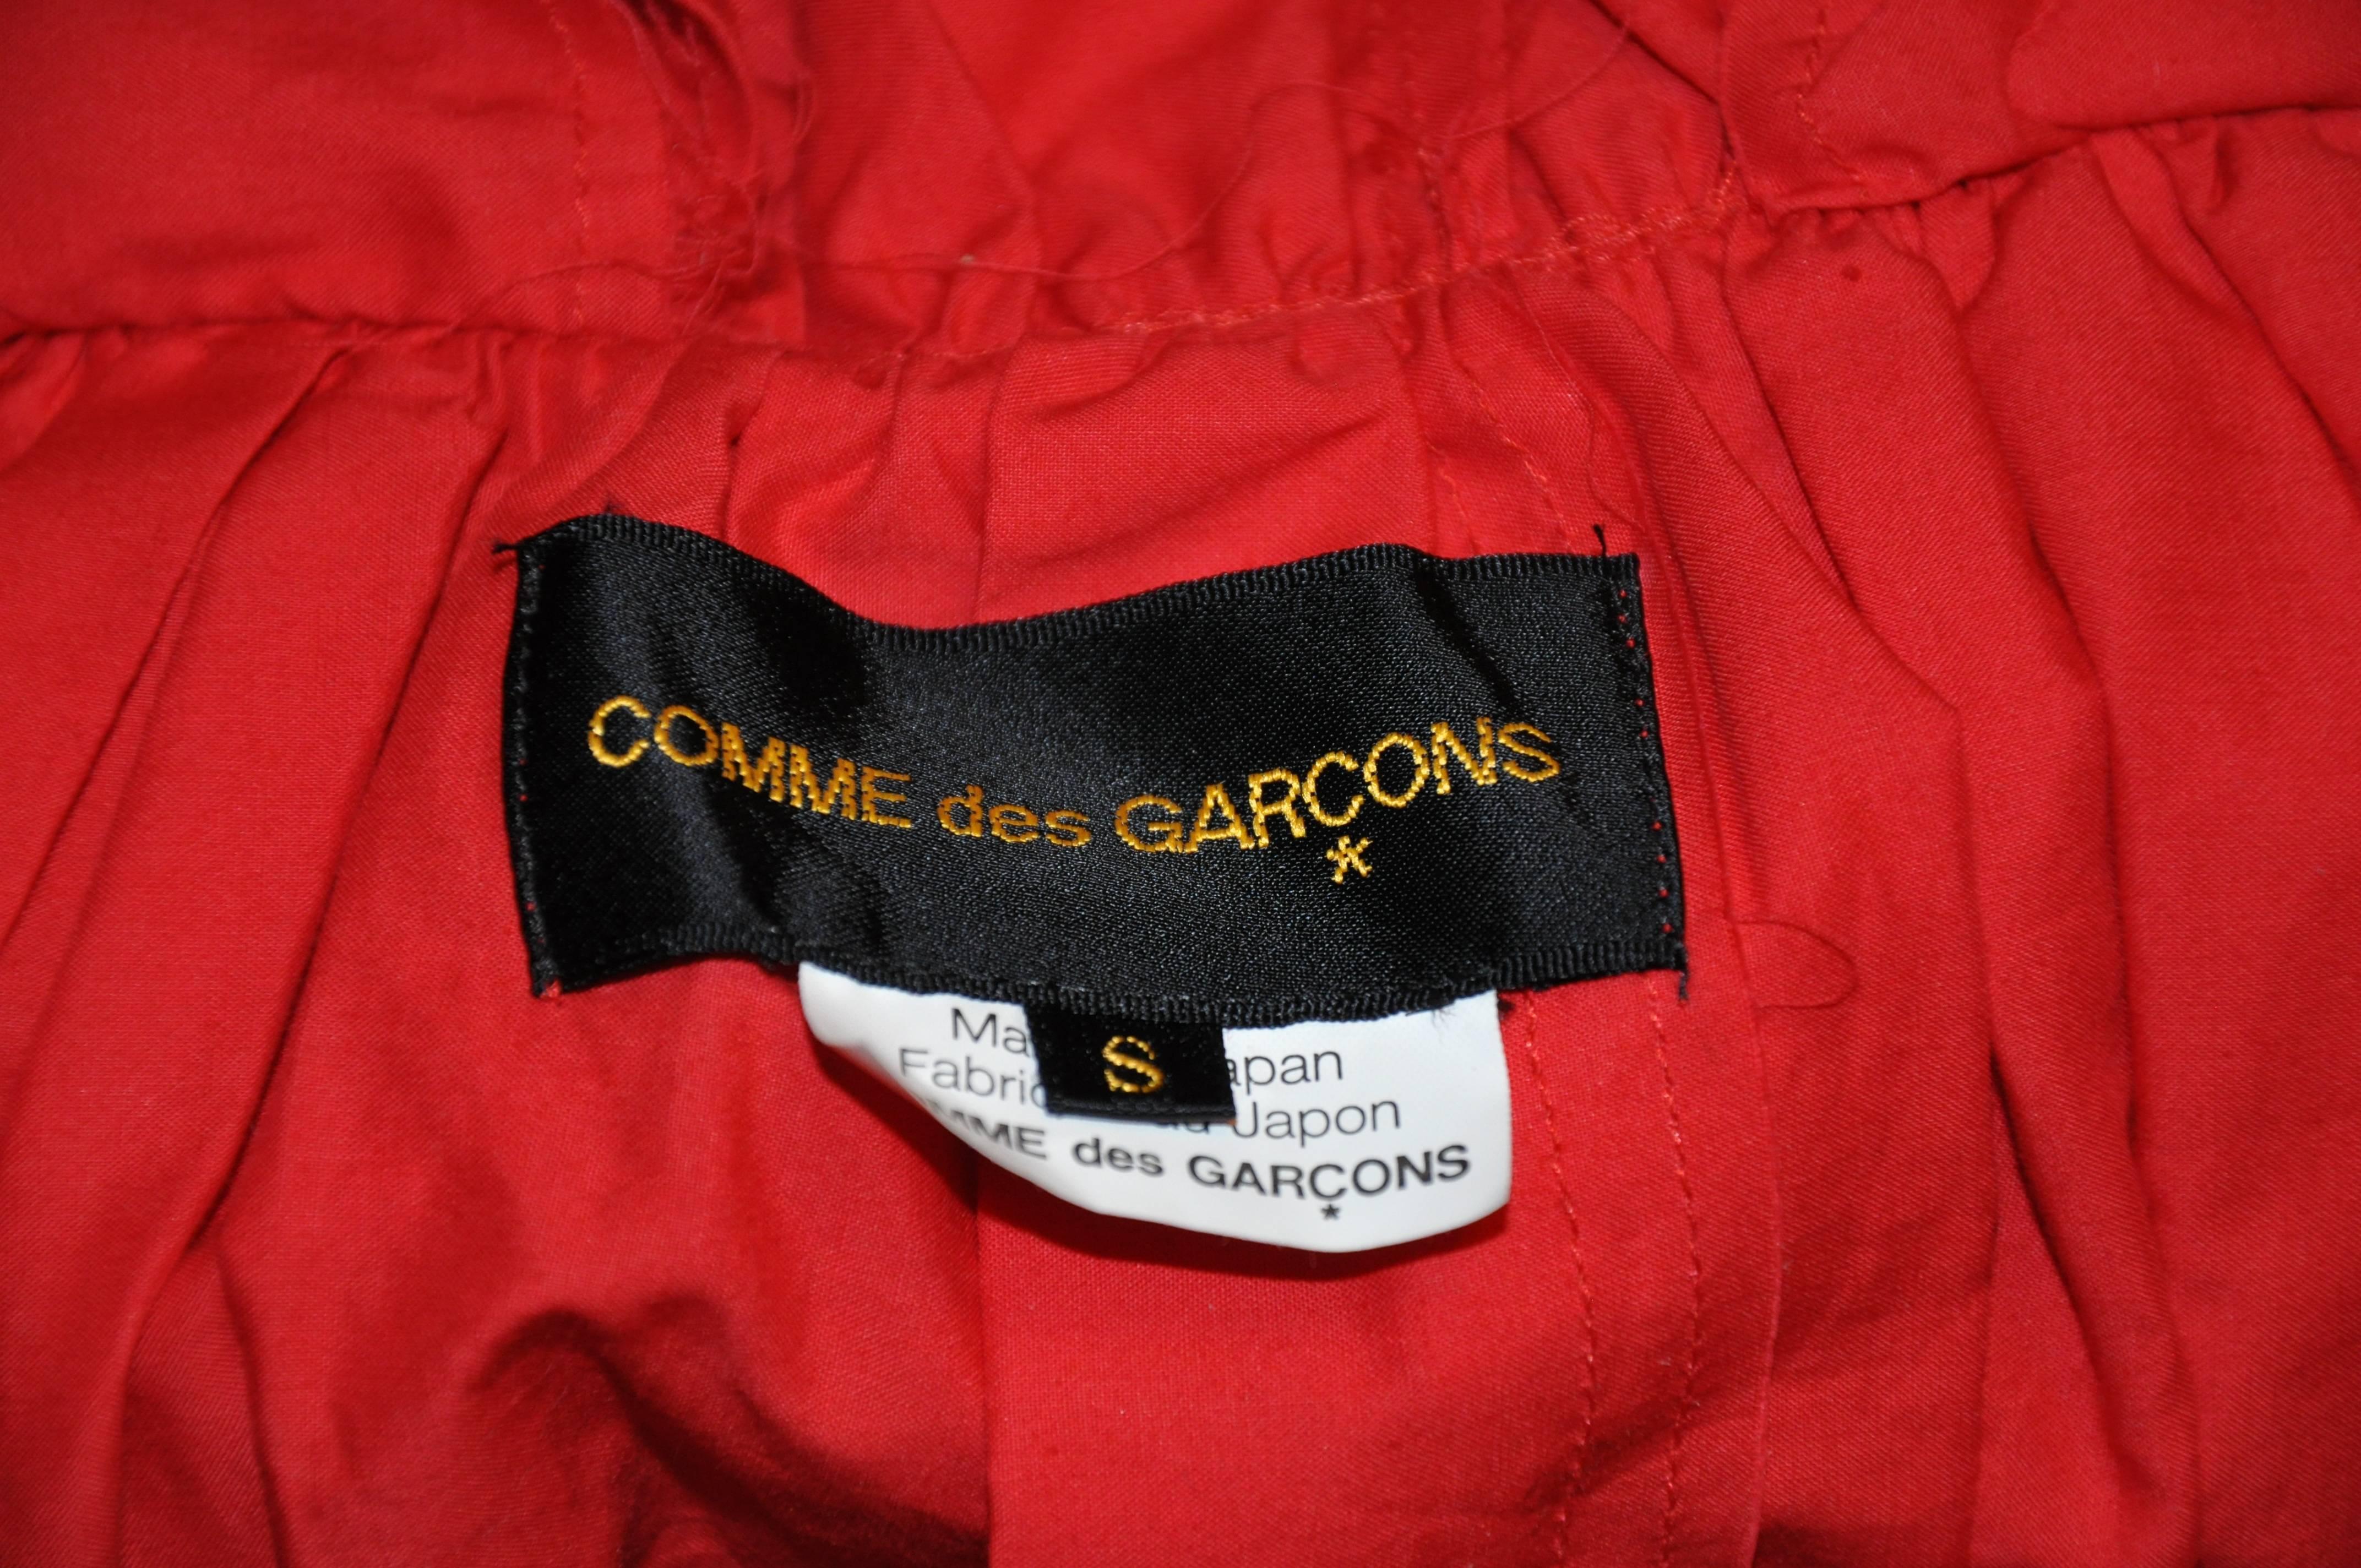        Comme des Garcons wonderfully wicked engine red deconstructed multi-pleated, multi-ruffle crop top detailing two collars. There are two matching buttons in front with detailing deconstructed ruffles along the extended sleeves. Waistband